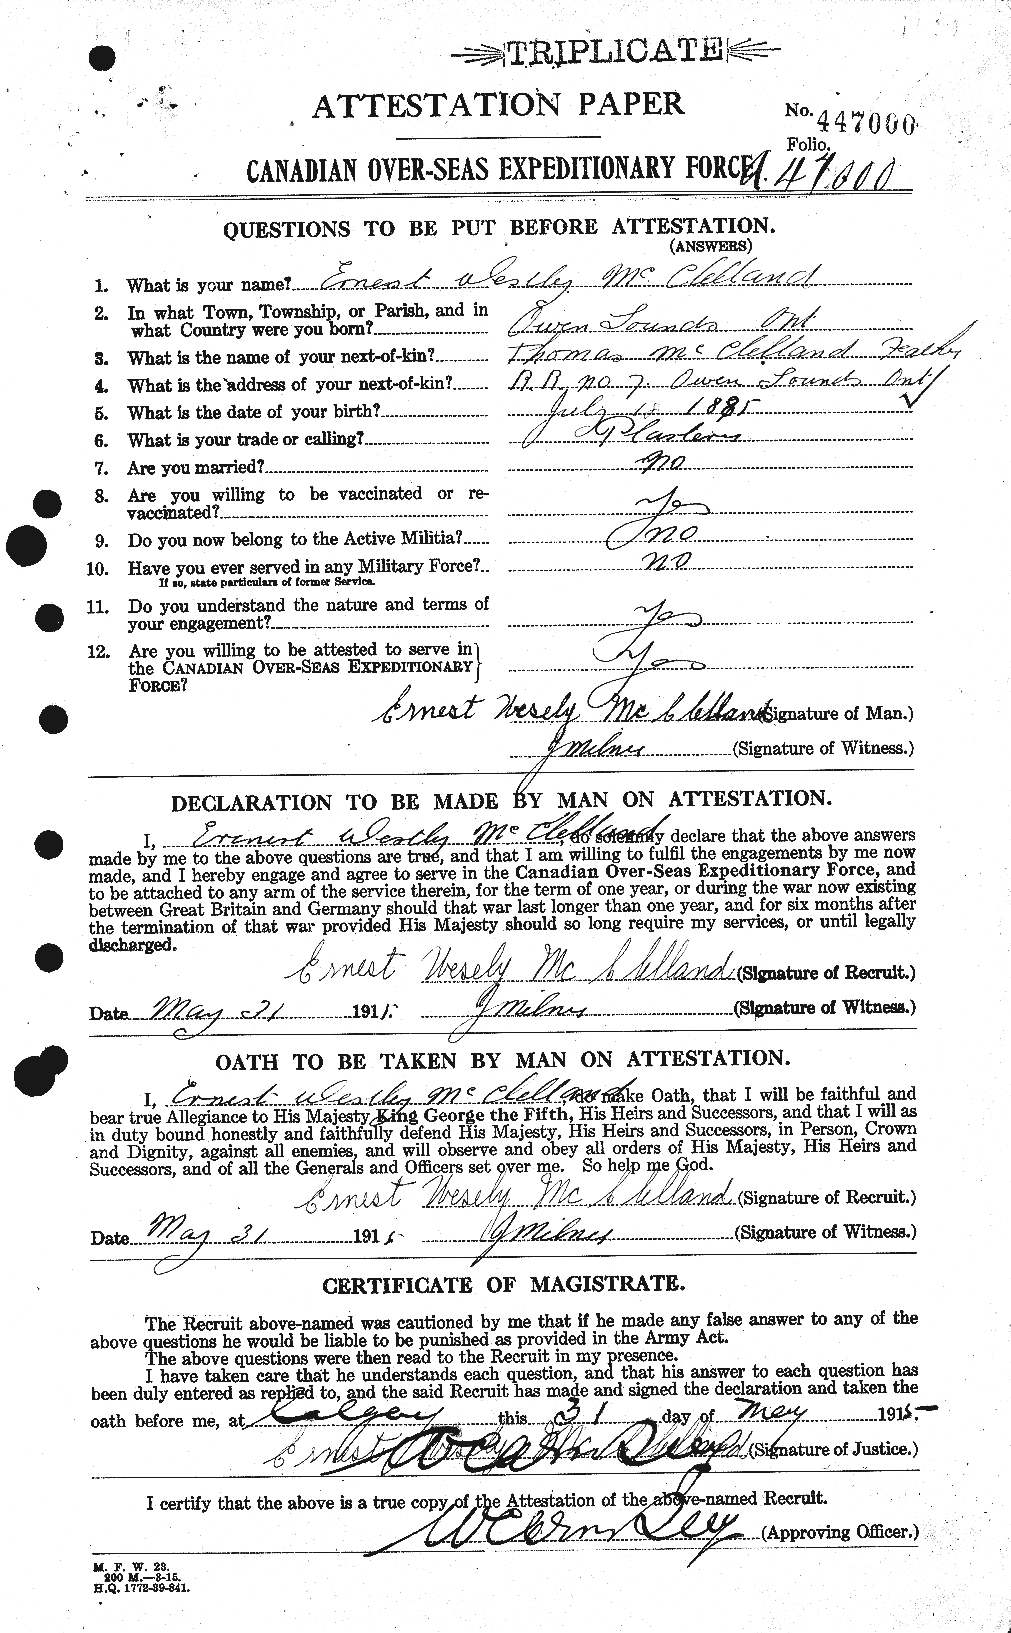 Personnel Records of the First World War - CEF 135253a